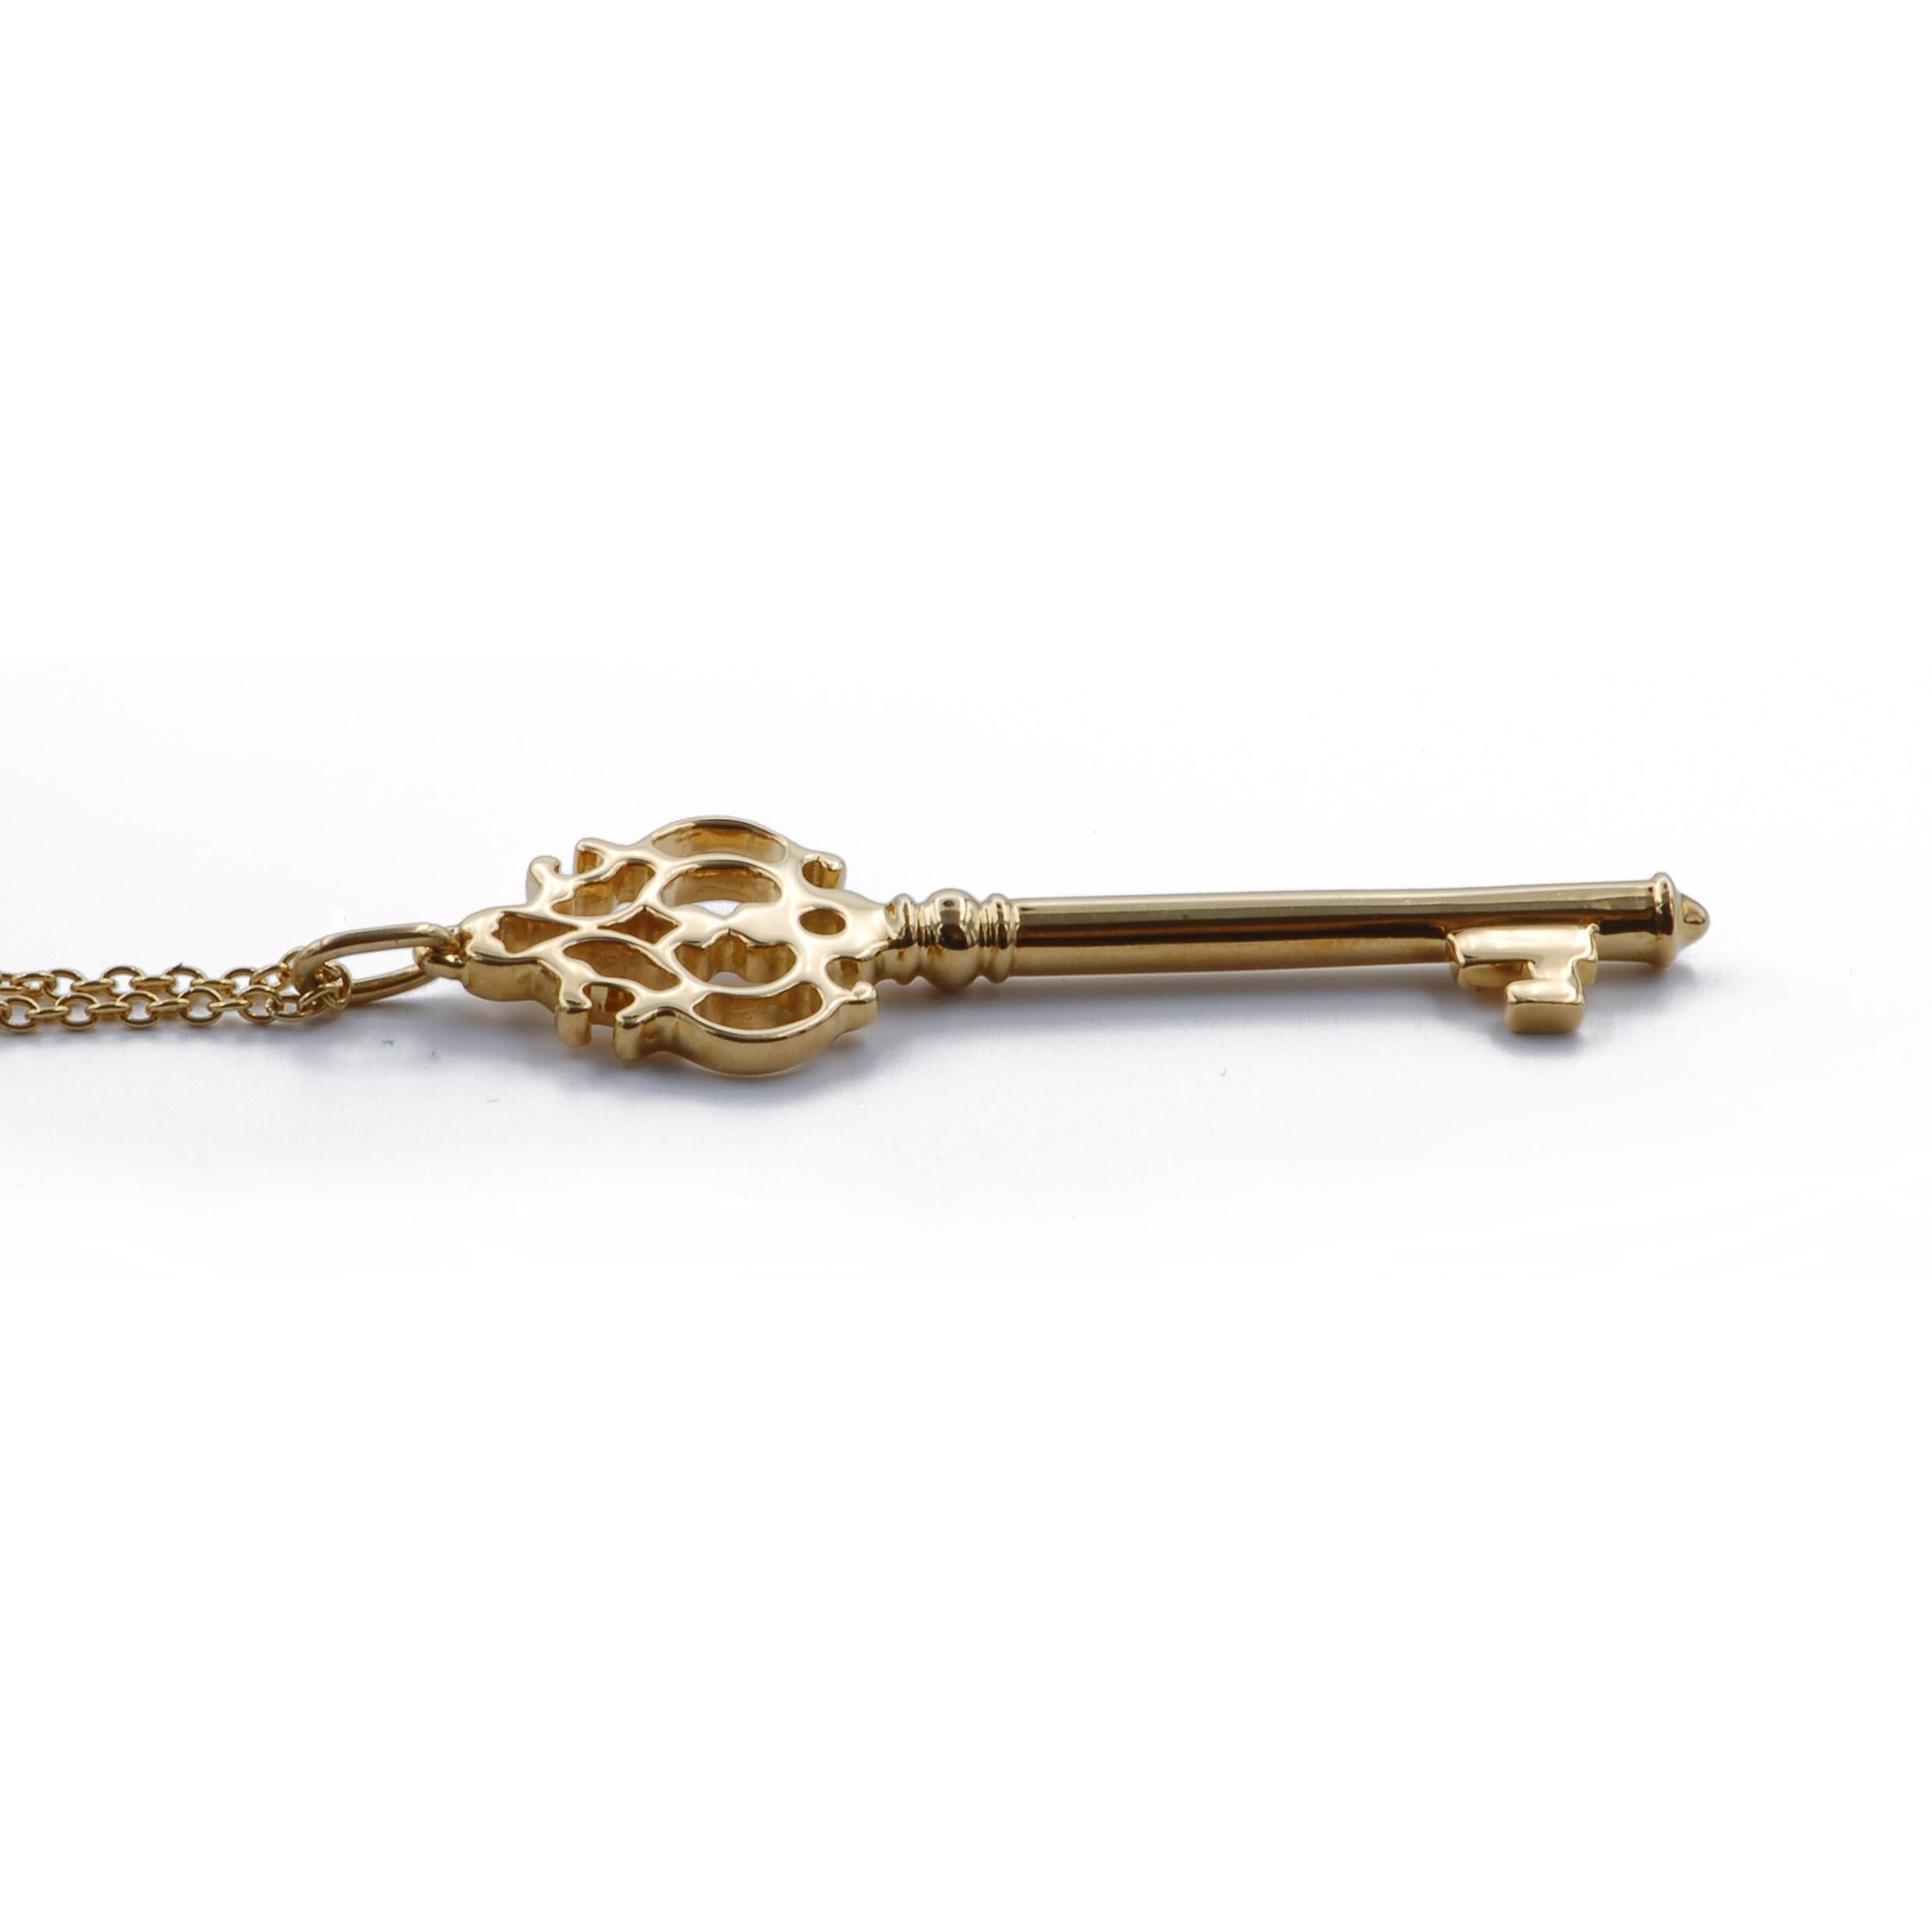 Sasha Primak Gold and Diamond Ornate Key Pendant In Excellent Condition For Sale In New York, NY